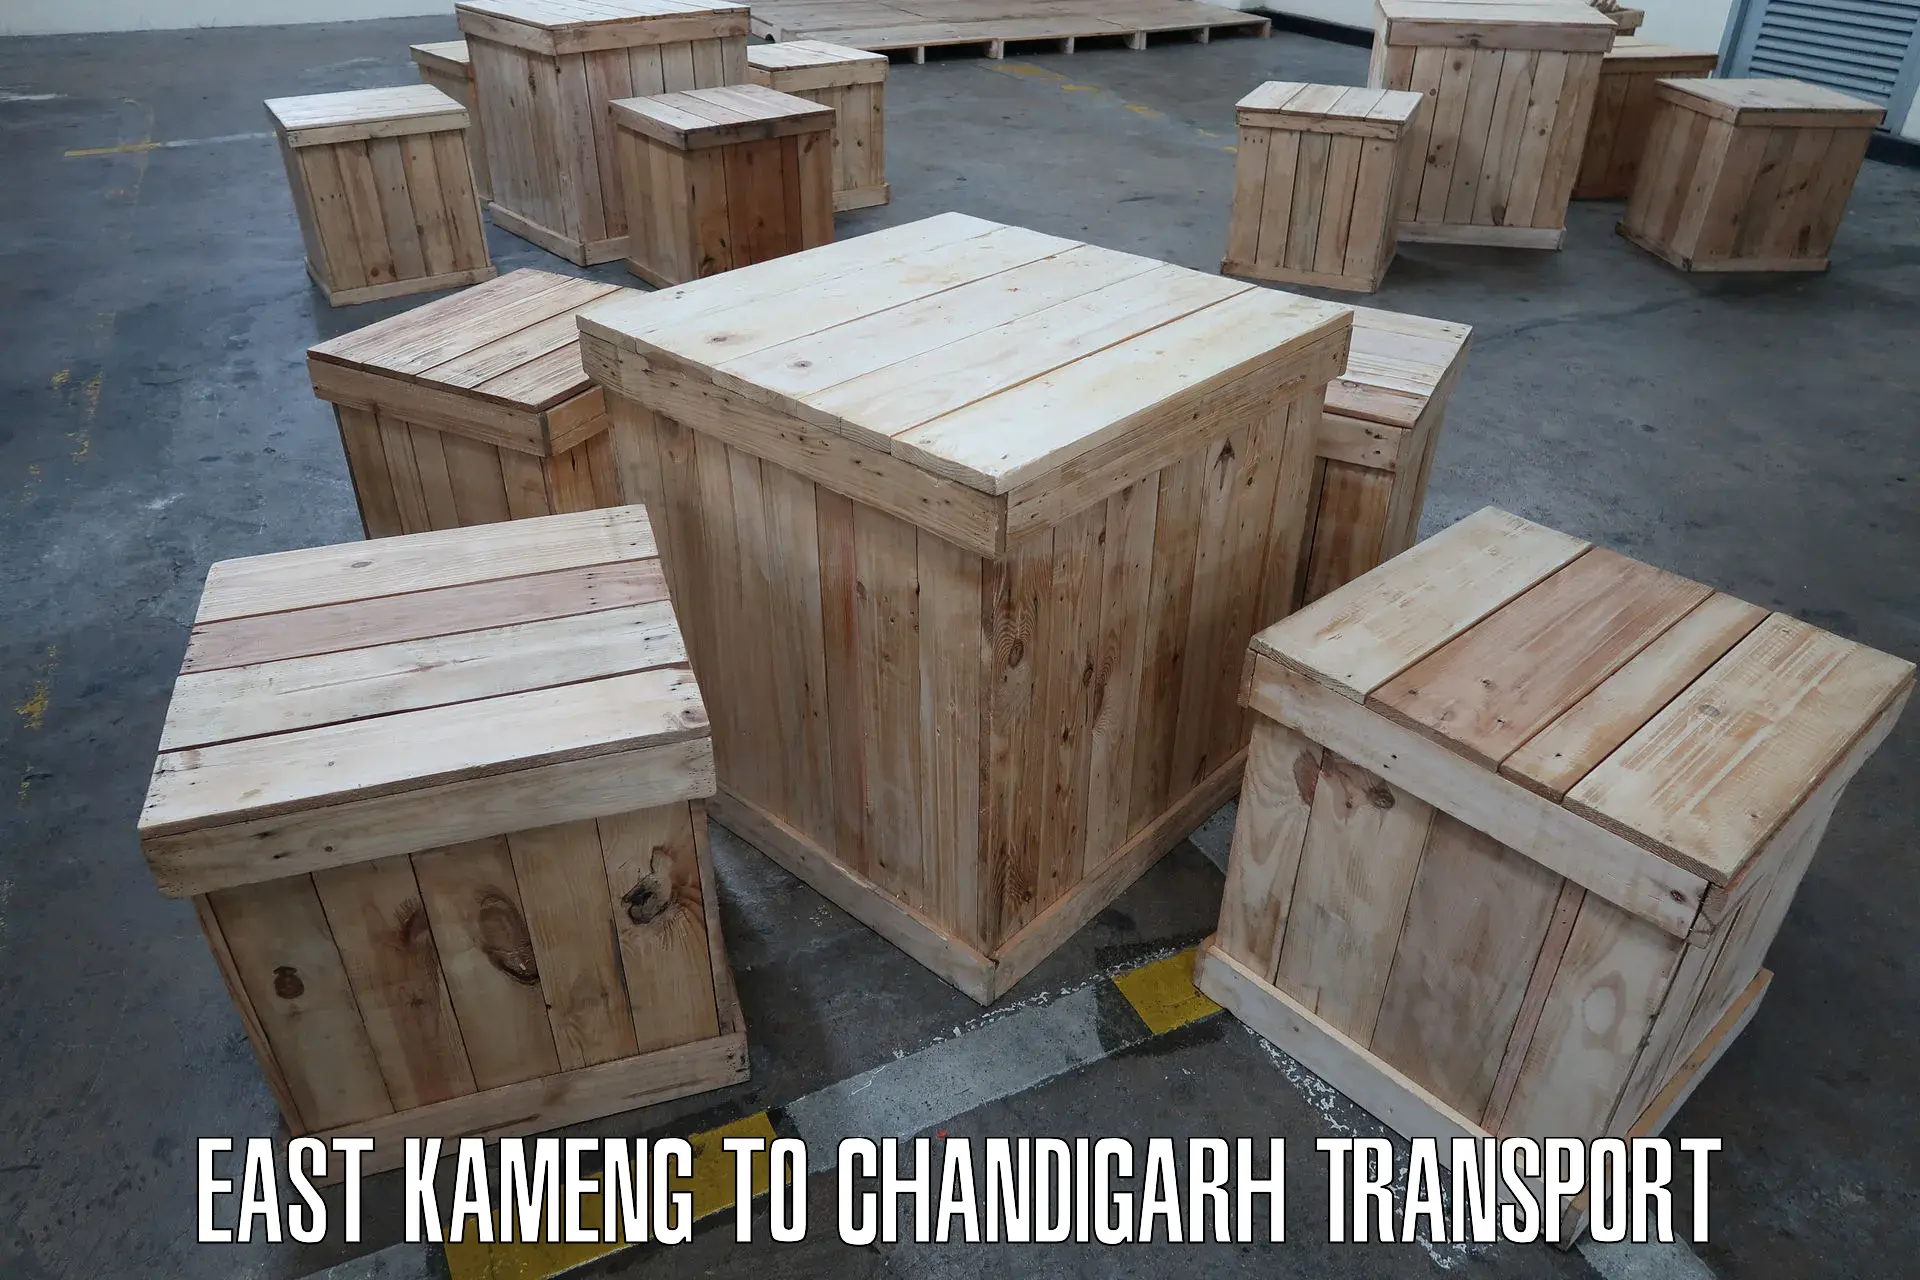 Container transport service East Kameng to Kharar